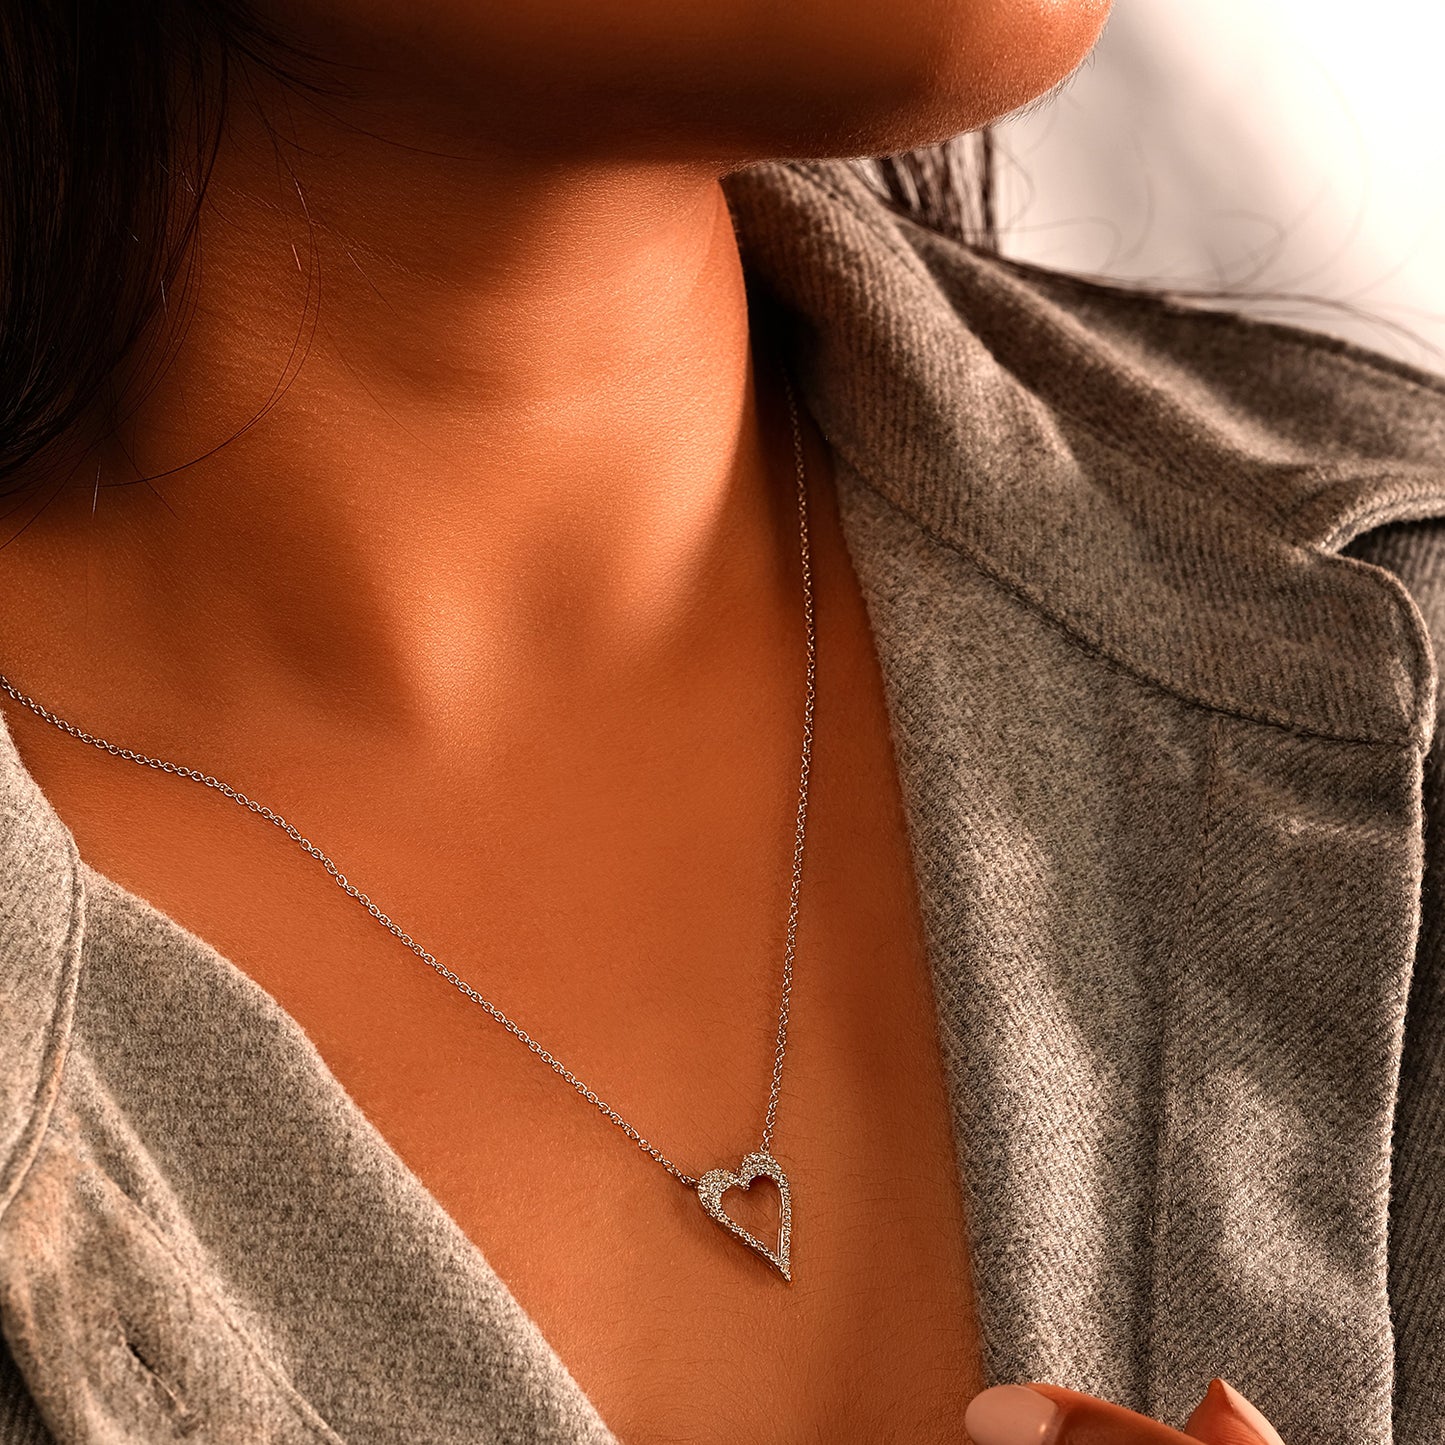 Dainty Beautiful Unique Heart Diamond Necklace in 925 Sterling Silver